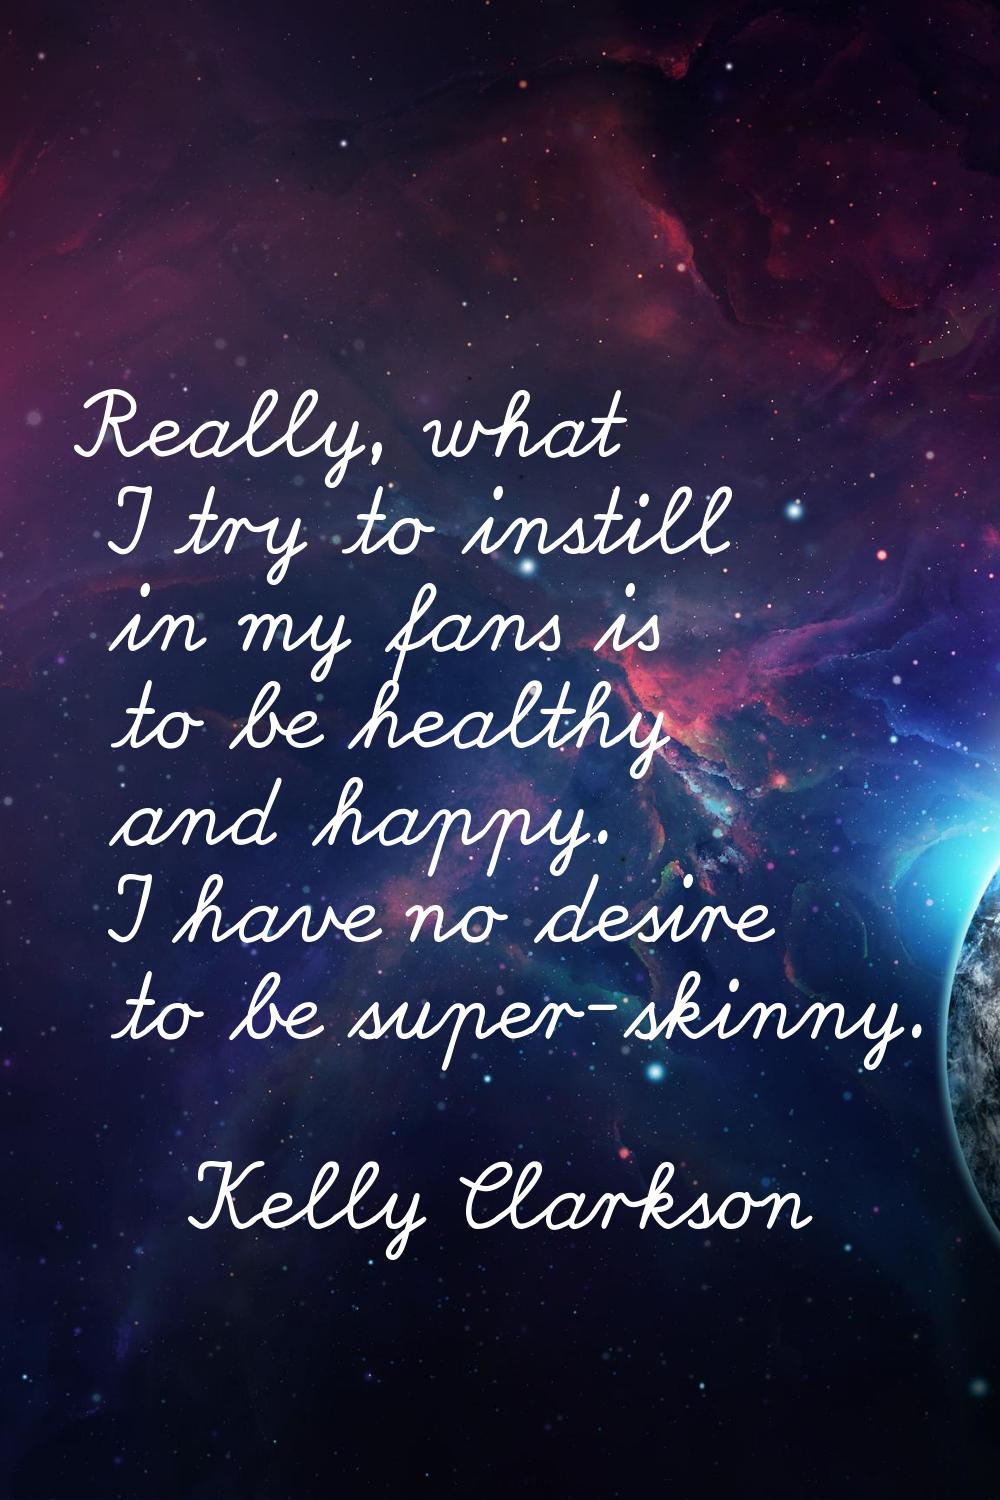 Really, what I try to instill in my fans is to be healthy and happy. I have no desire to be super-s